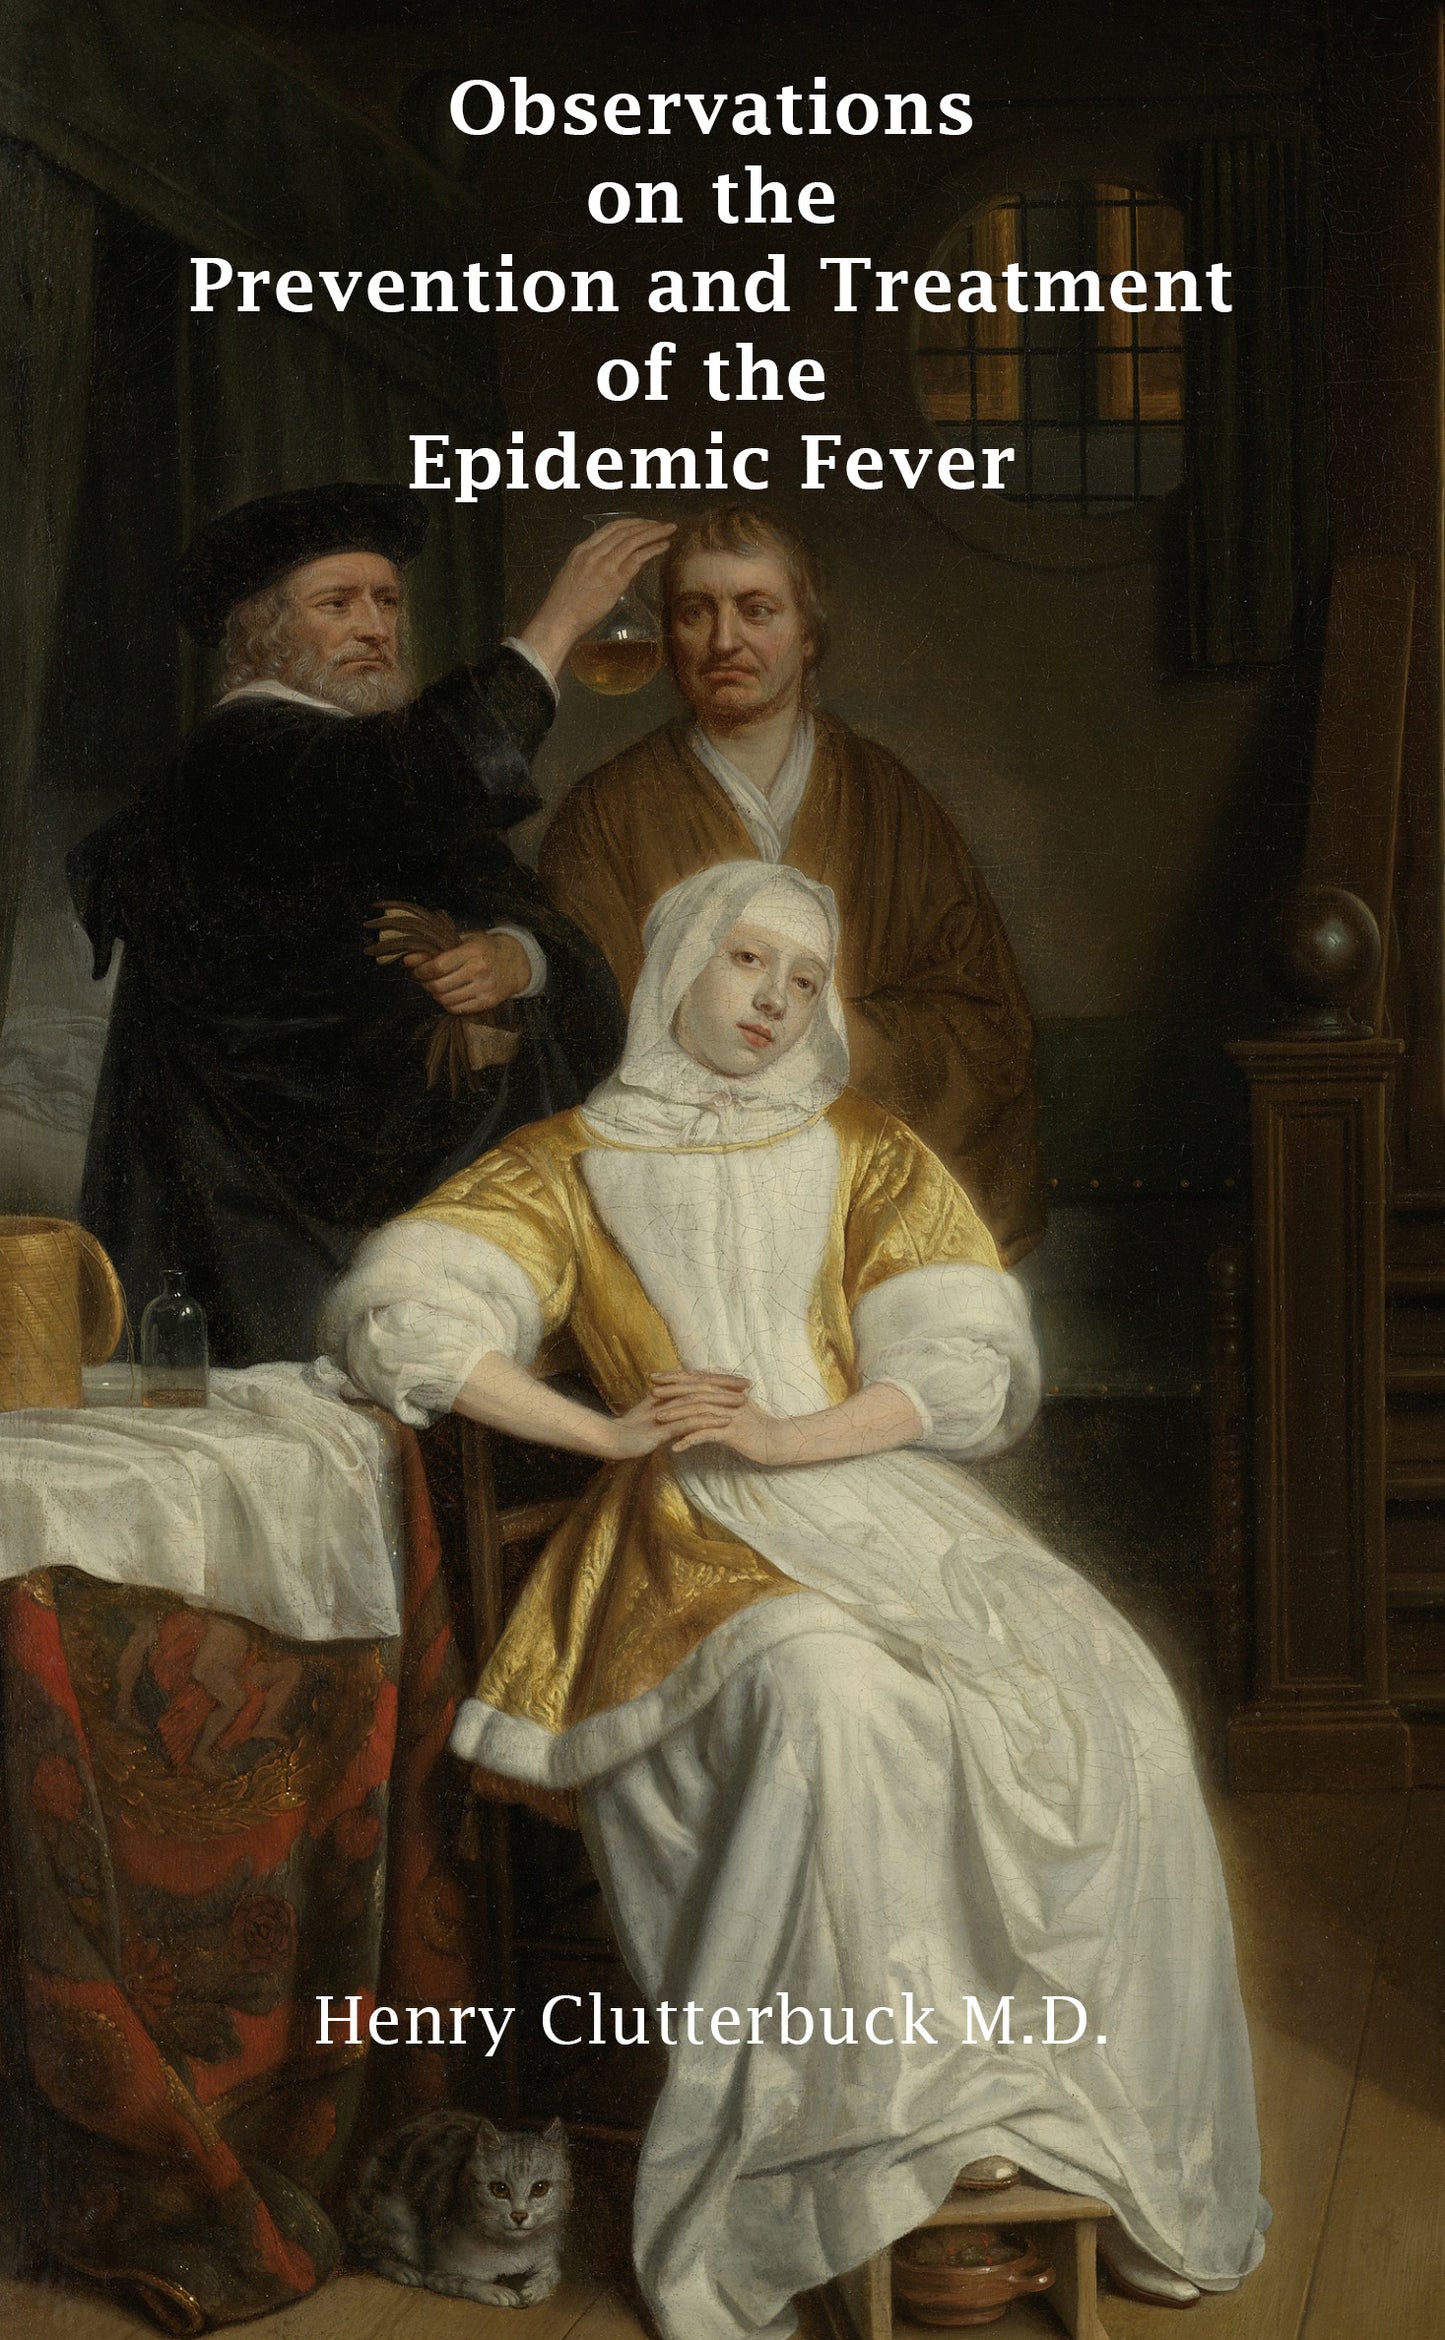 Observations on the Prevention and Treatment of the Epidemic Fever